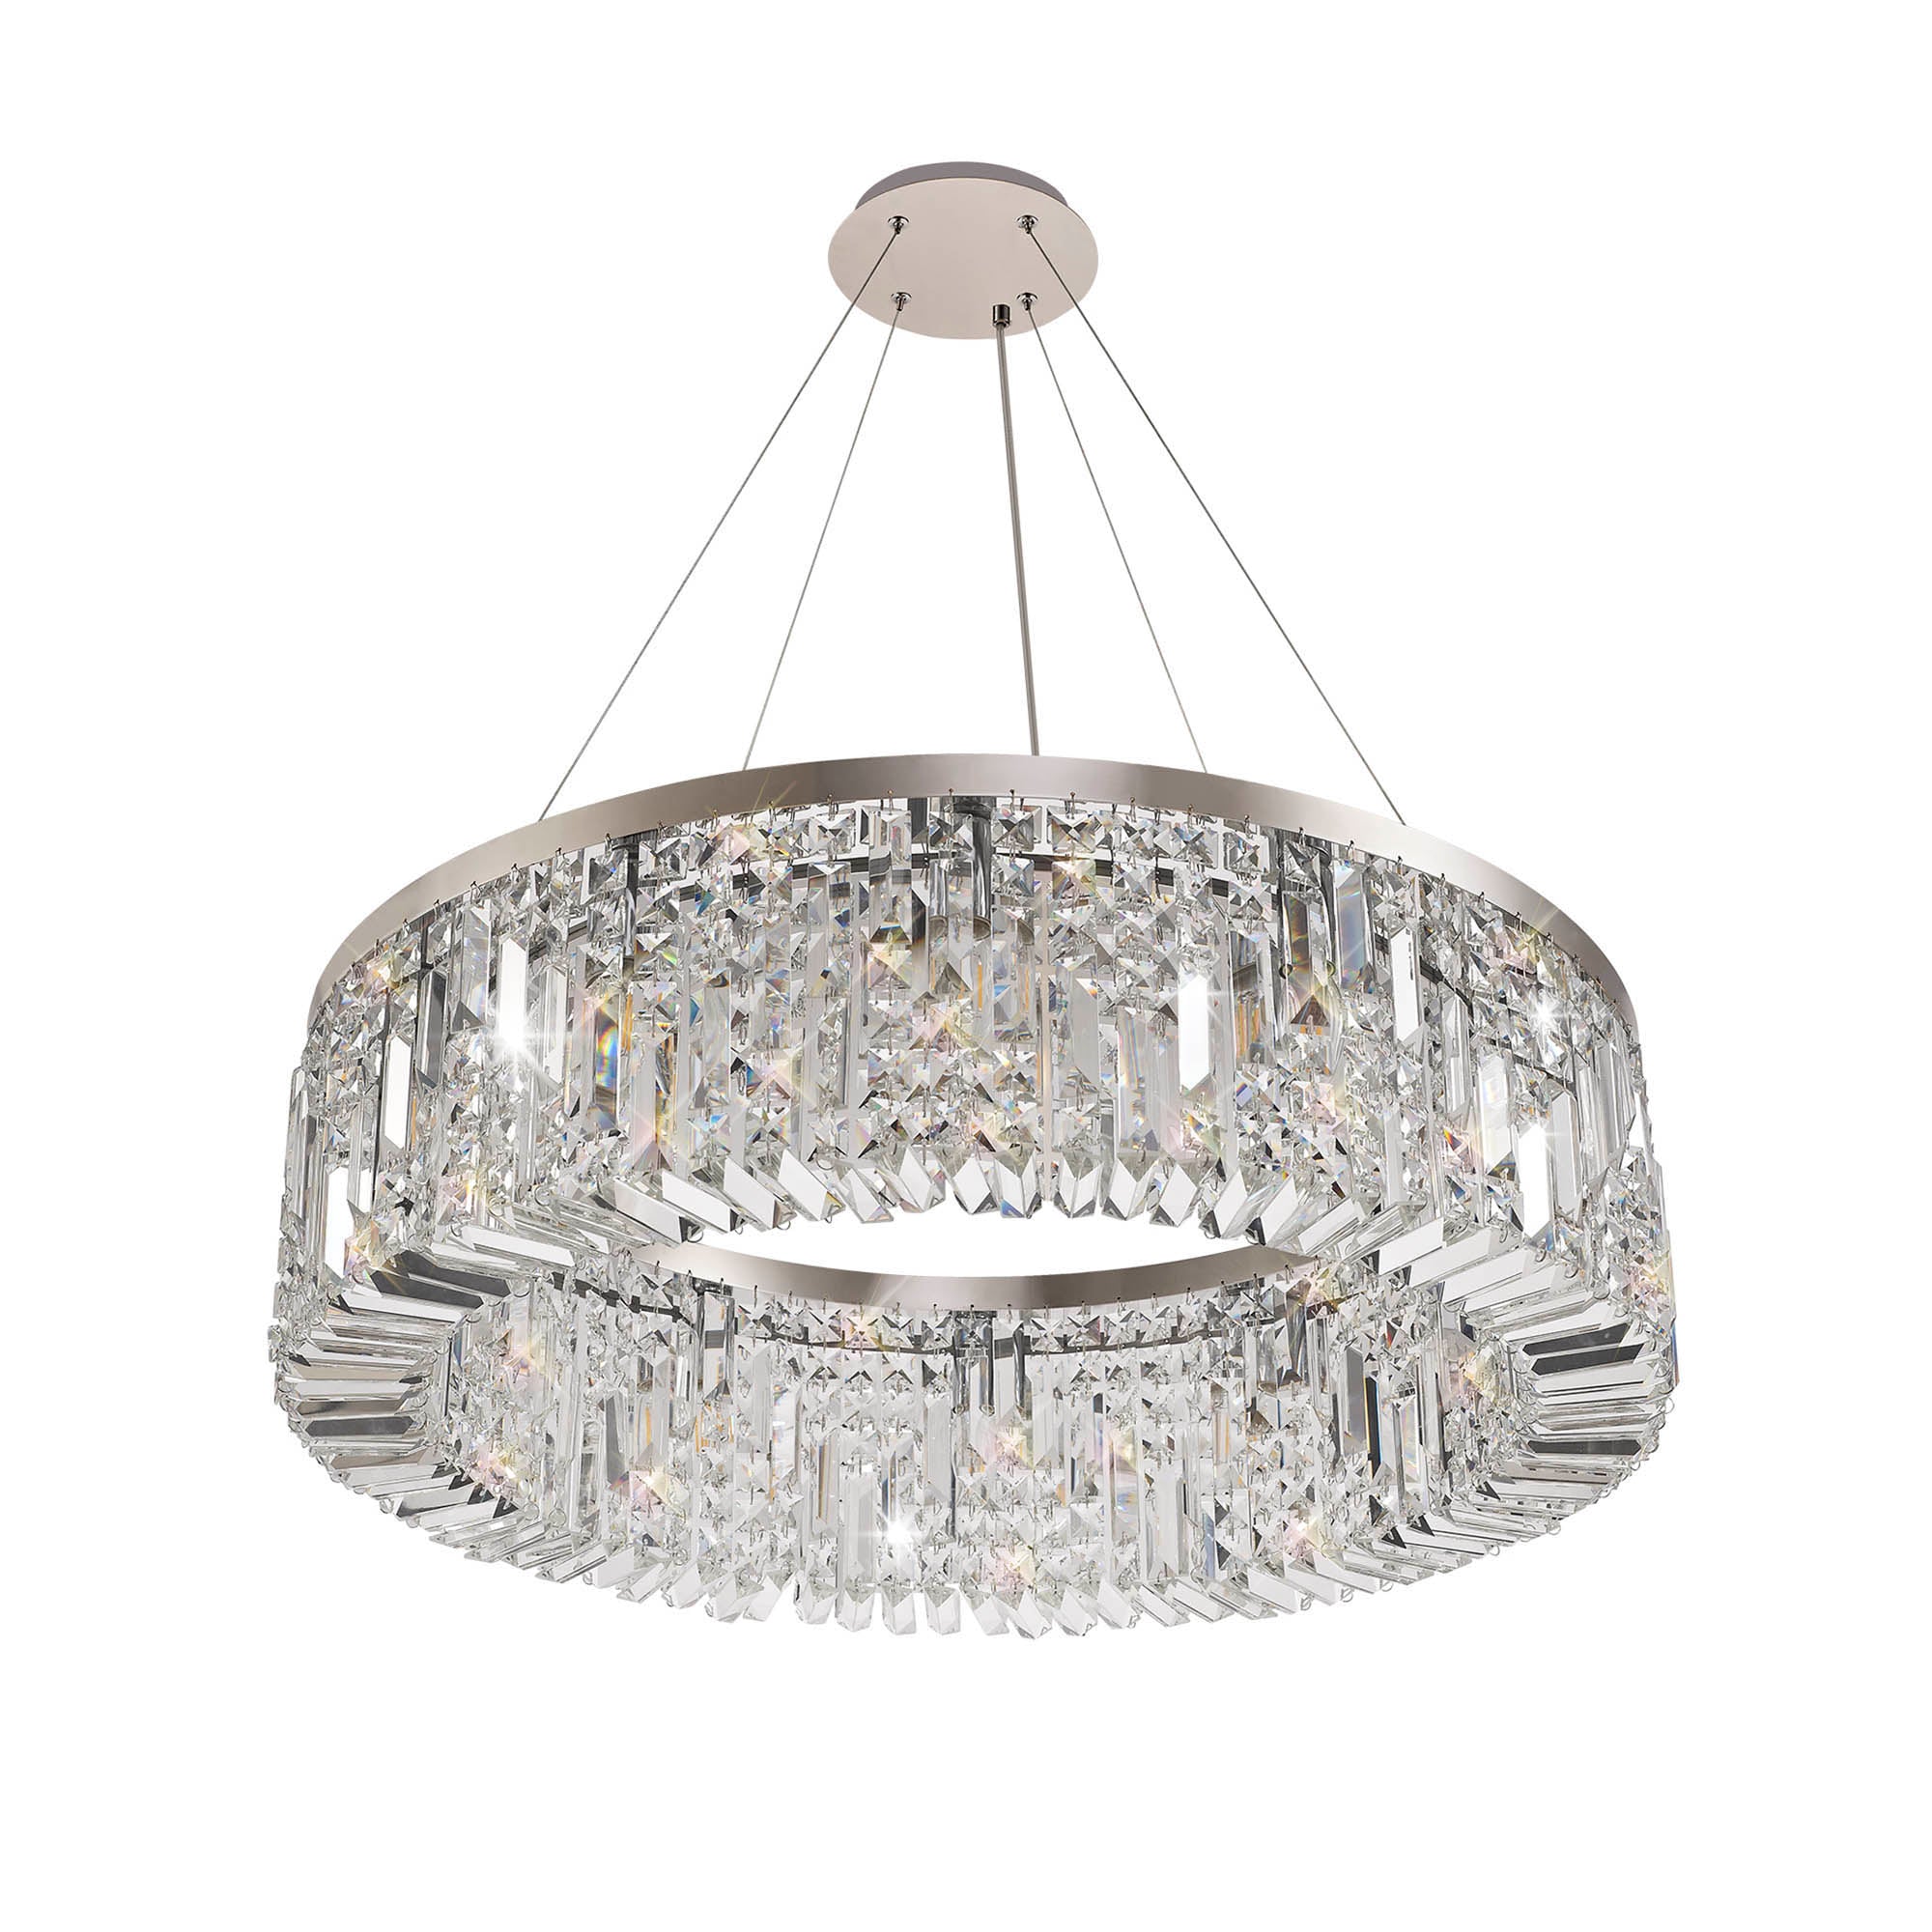 Mayfair 80cm Round Pendant Chandelier, 12 Light E14, Polished Chrome/Crystal Item Weight: 16.8kg - LO178083